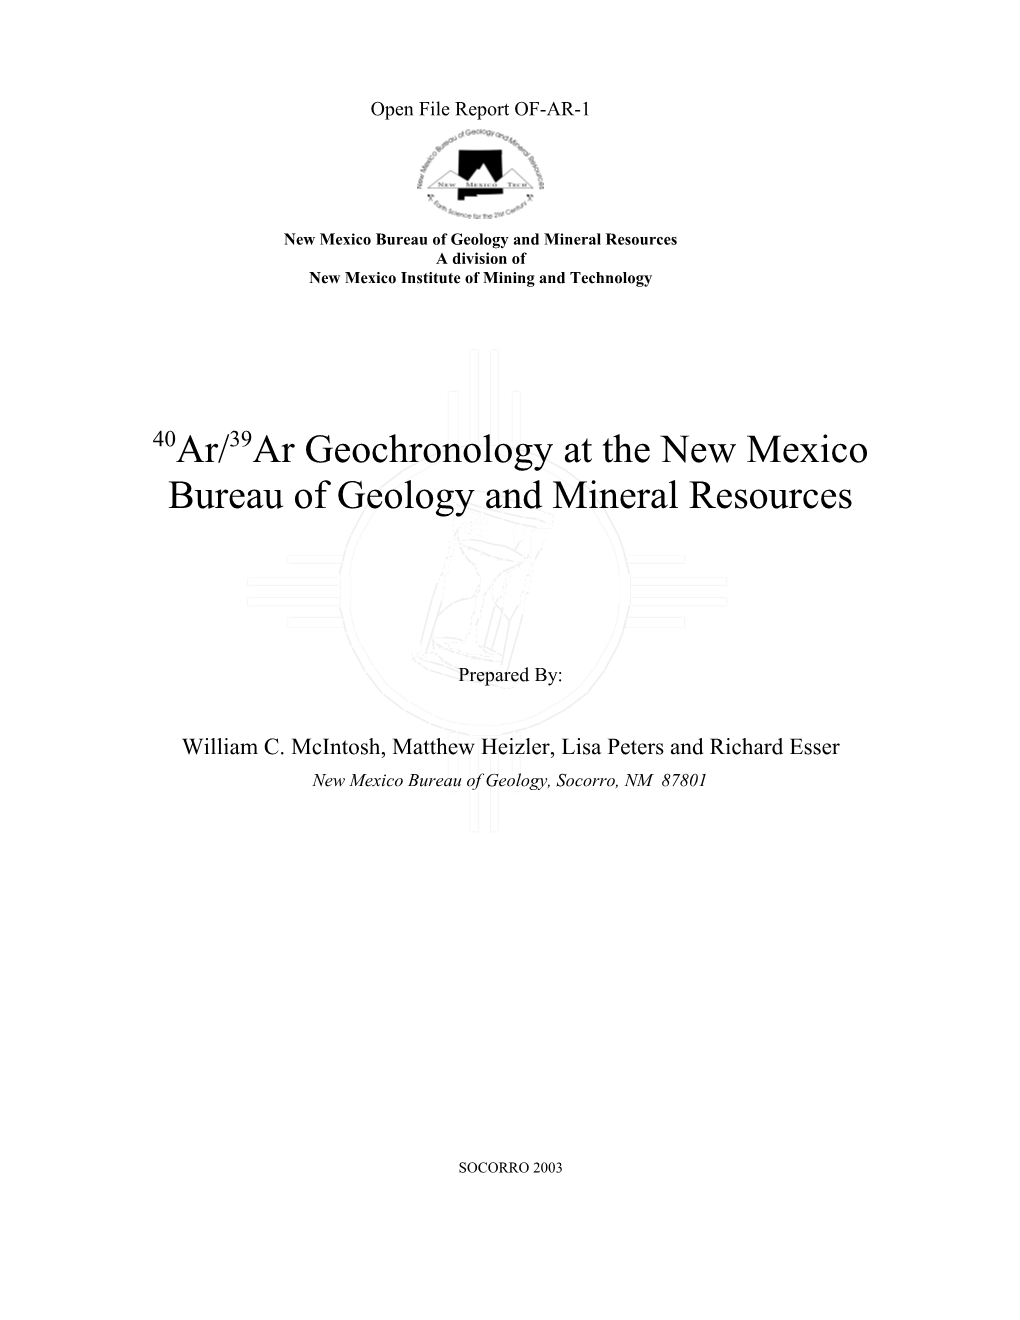 New Mexico Bureau of Mines and Mineral Resources